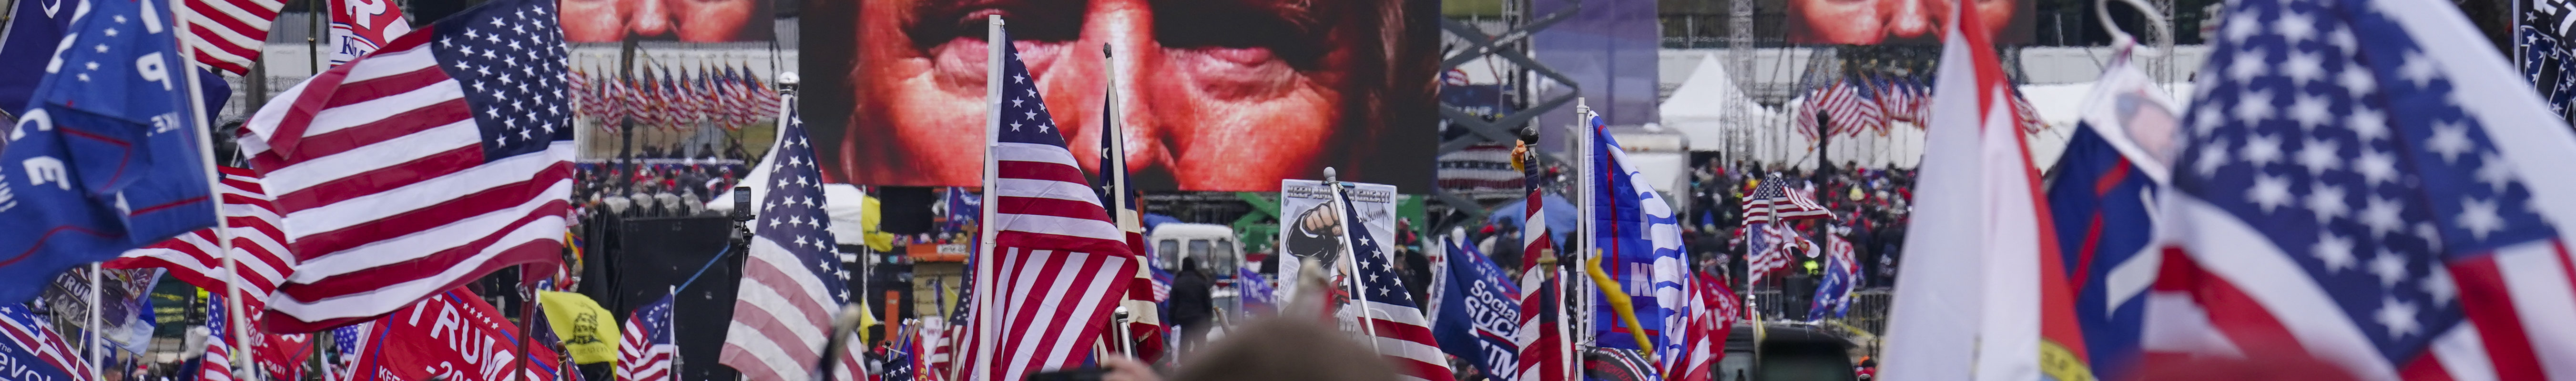 Trump supporters at the January 6th rally at the Ellipse. The Trump propaganda film is playing and three large screens show the top half of Trump’s face under an ominous red light. People in the crowd wave American flags and Trump 2020 flags.